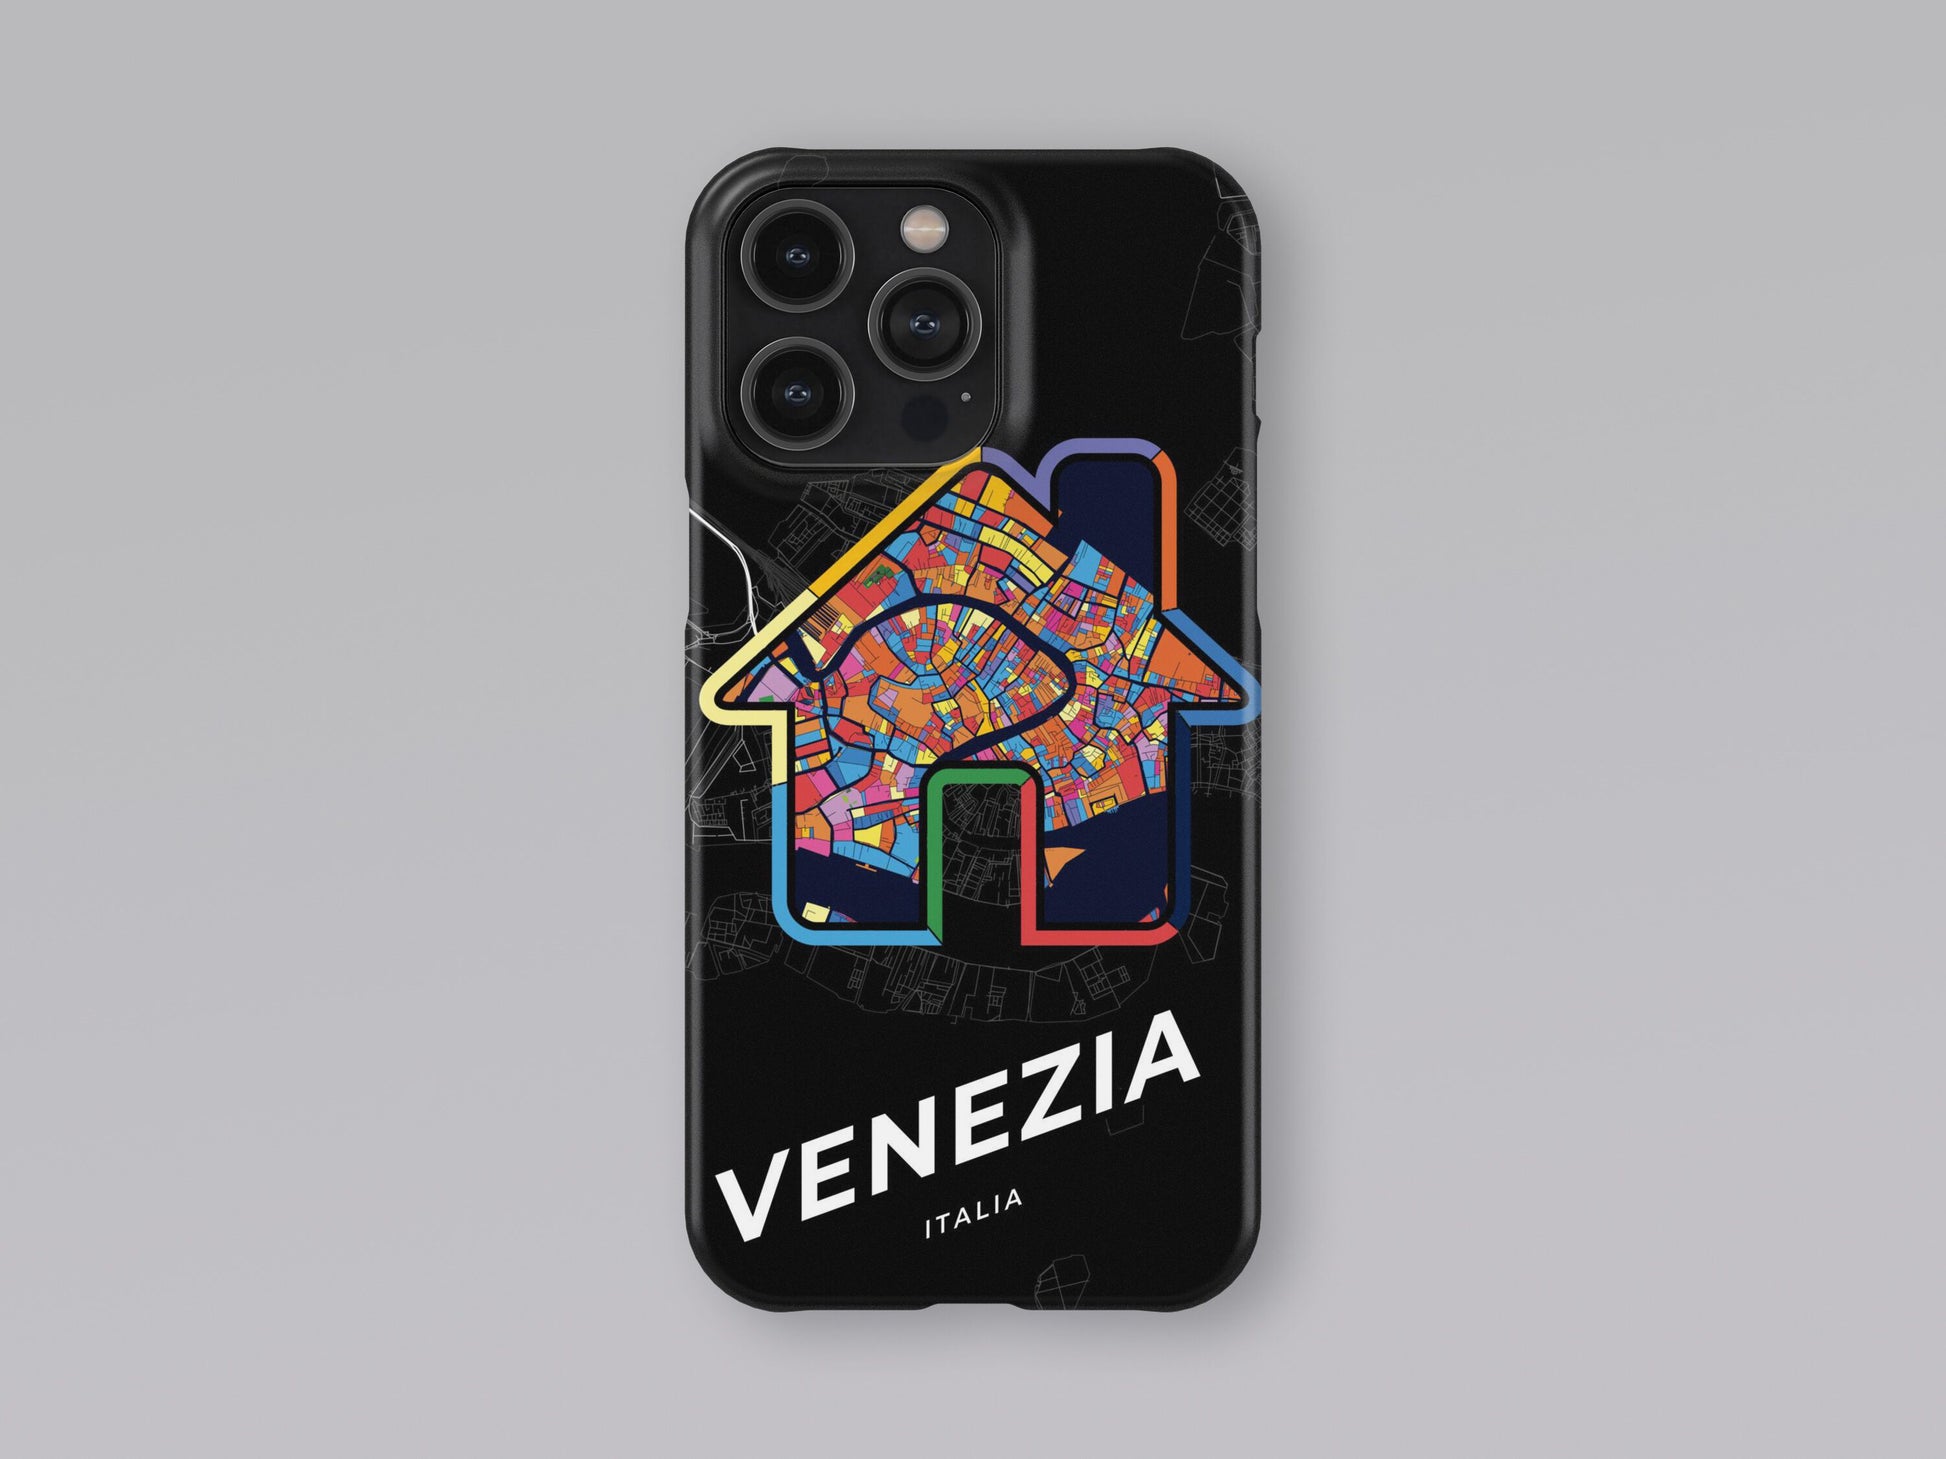 Venice Italy slim phone case with colorful icon 3